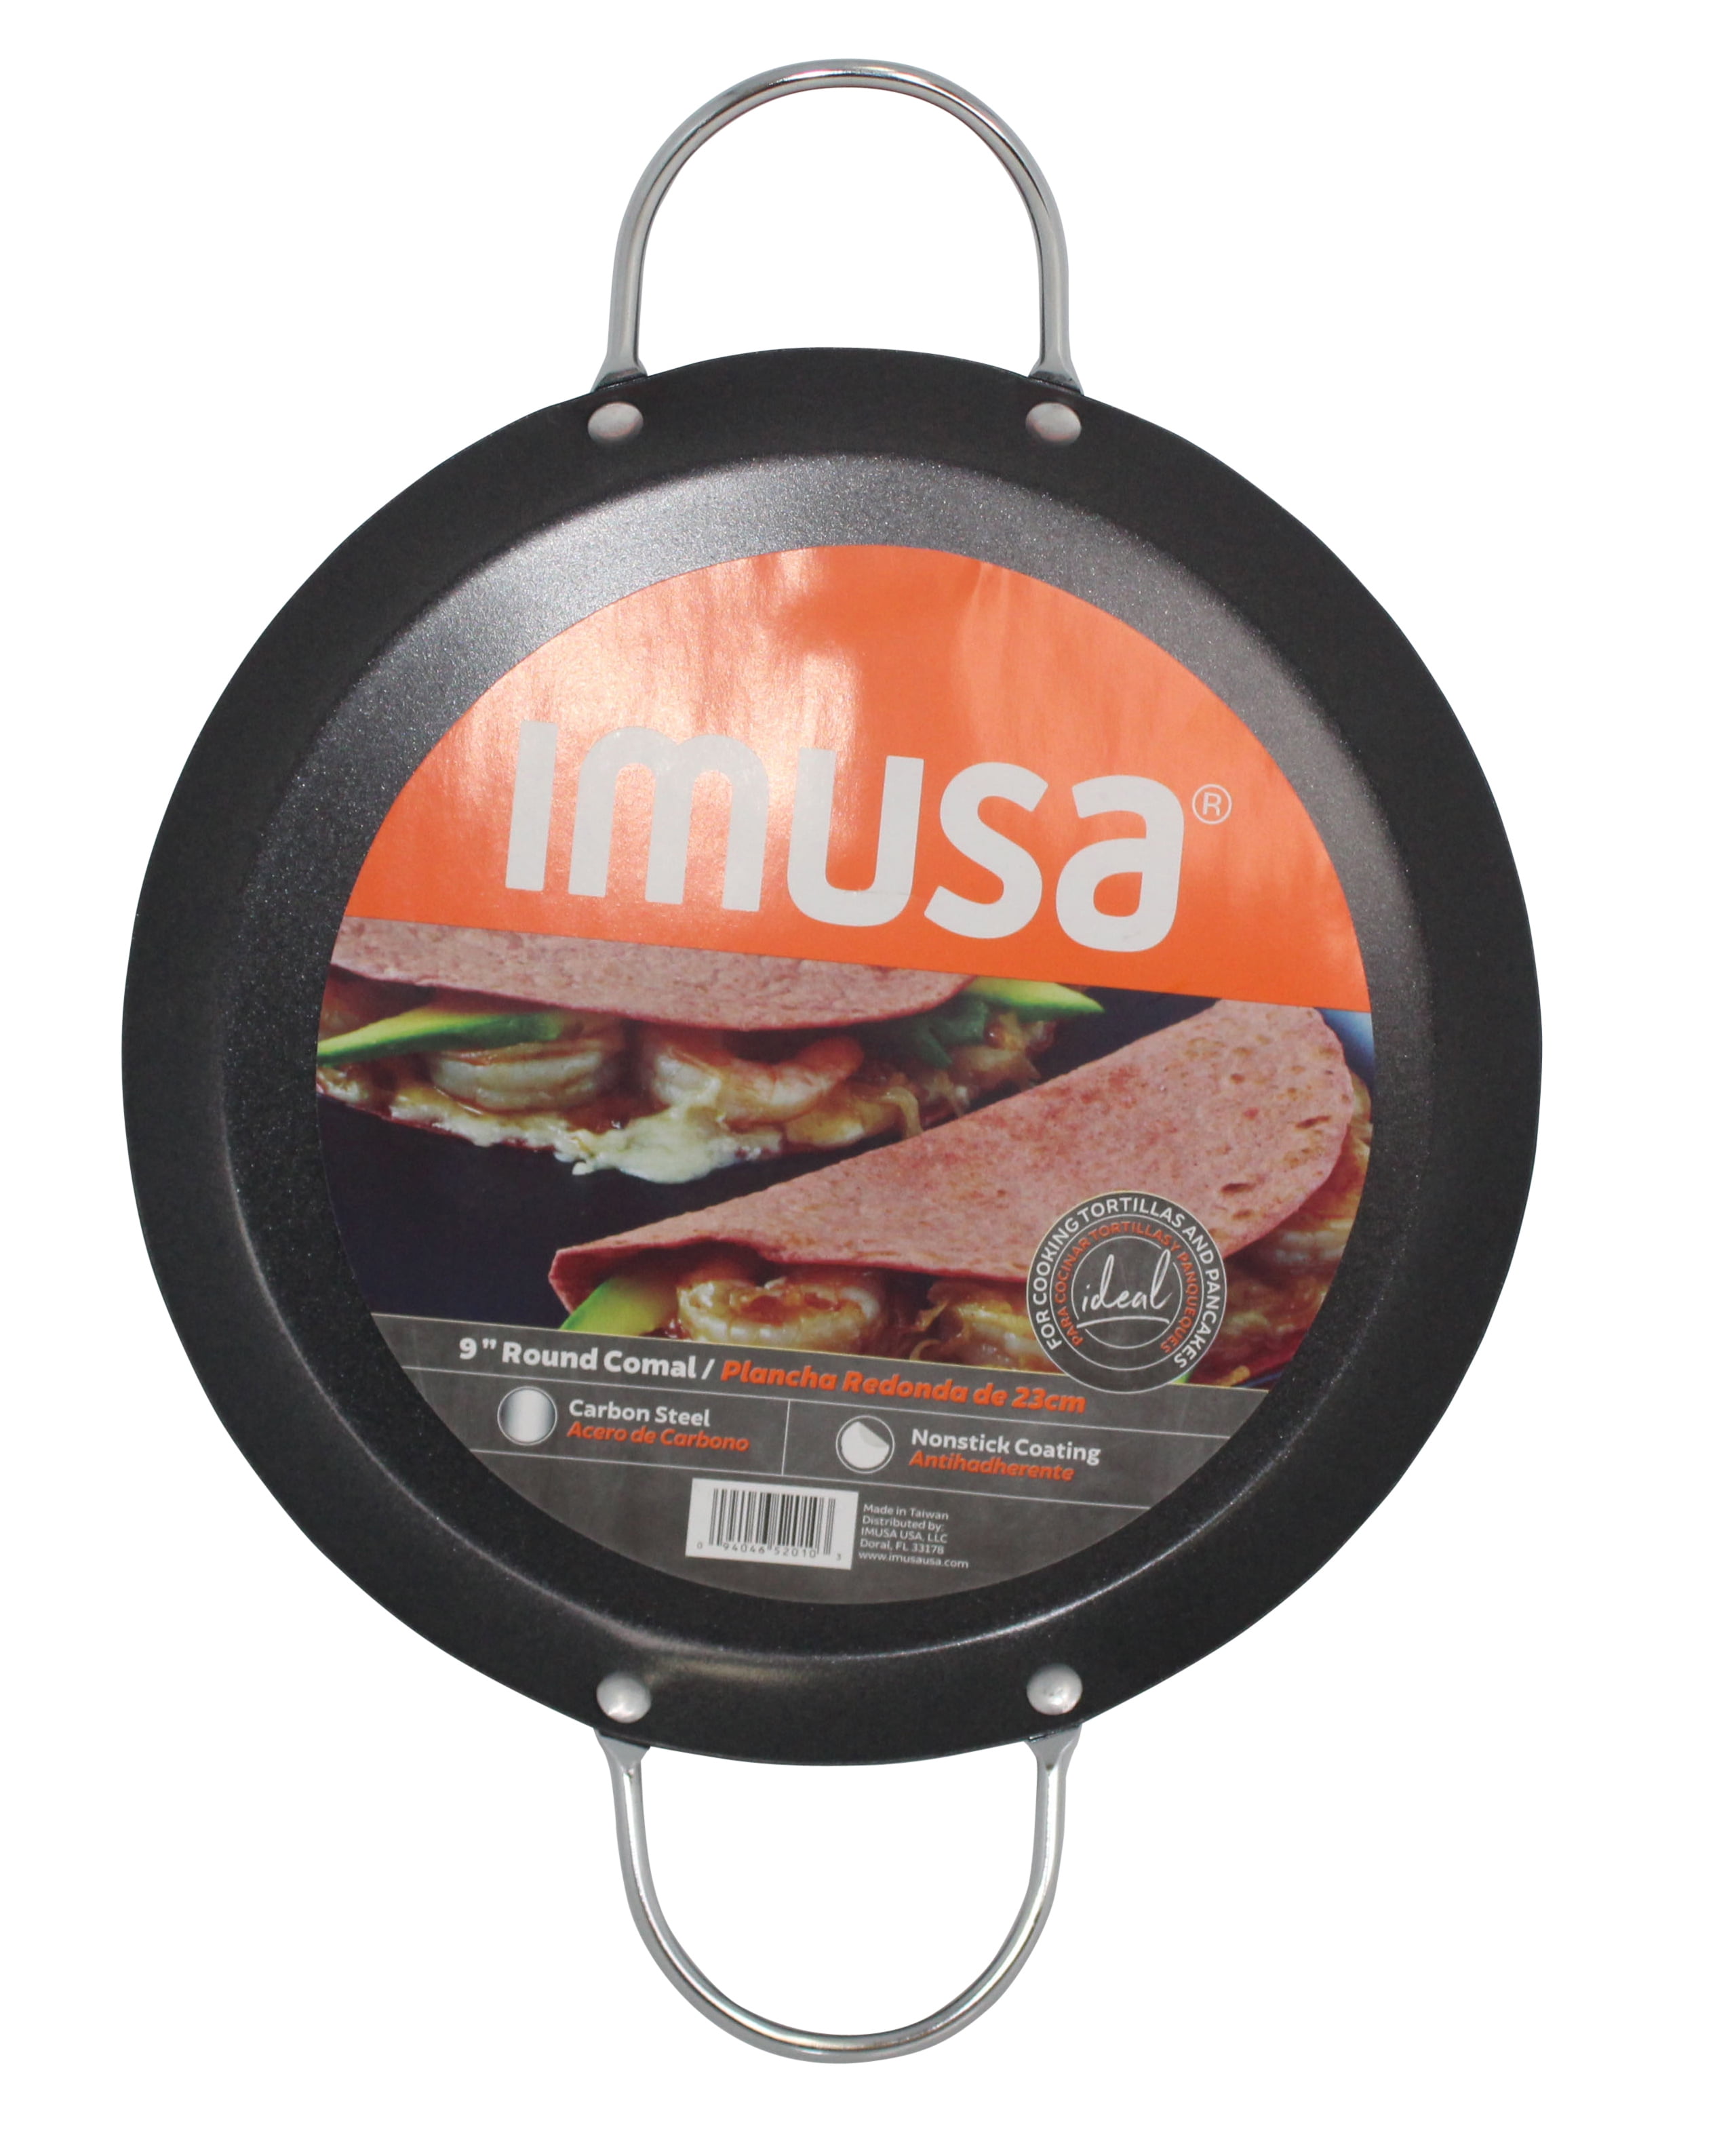 Imusa 13 inch Round Nonstick Carbon Steel Round Comal or Grill Pan, Black 